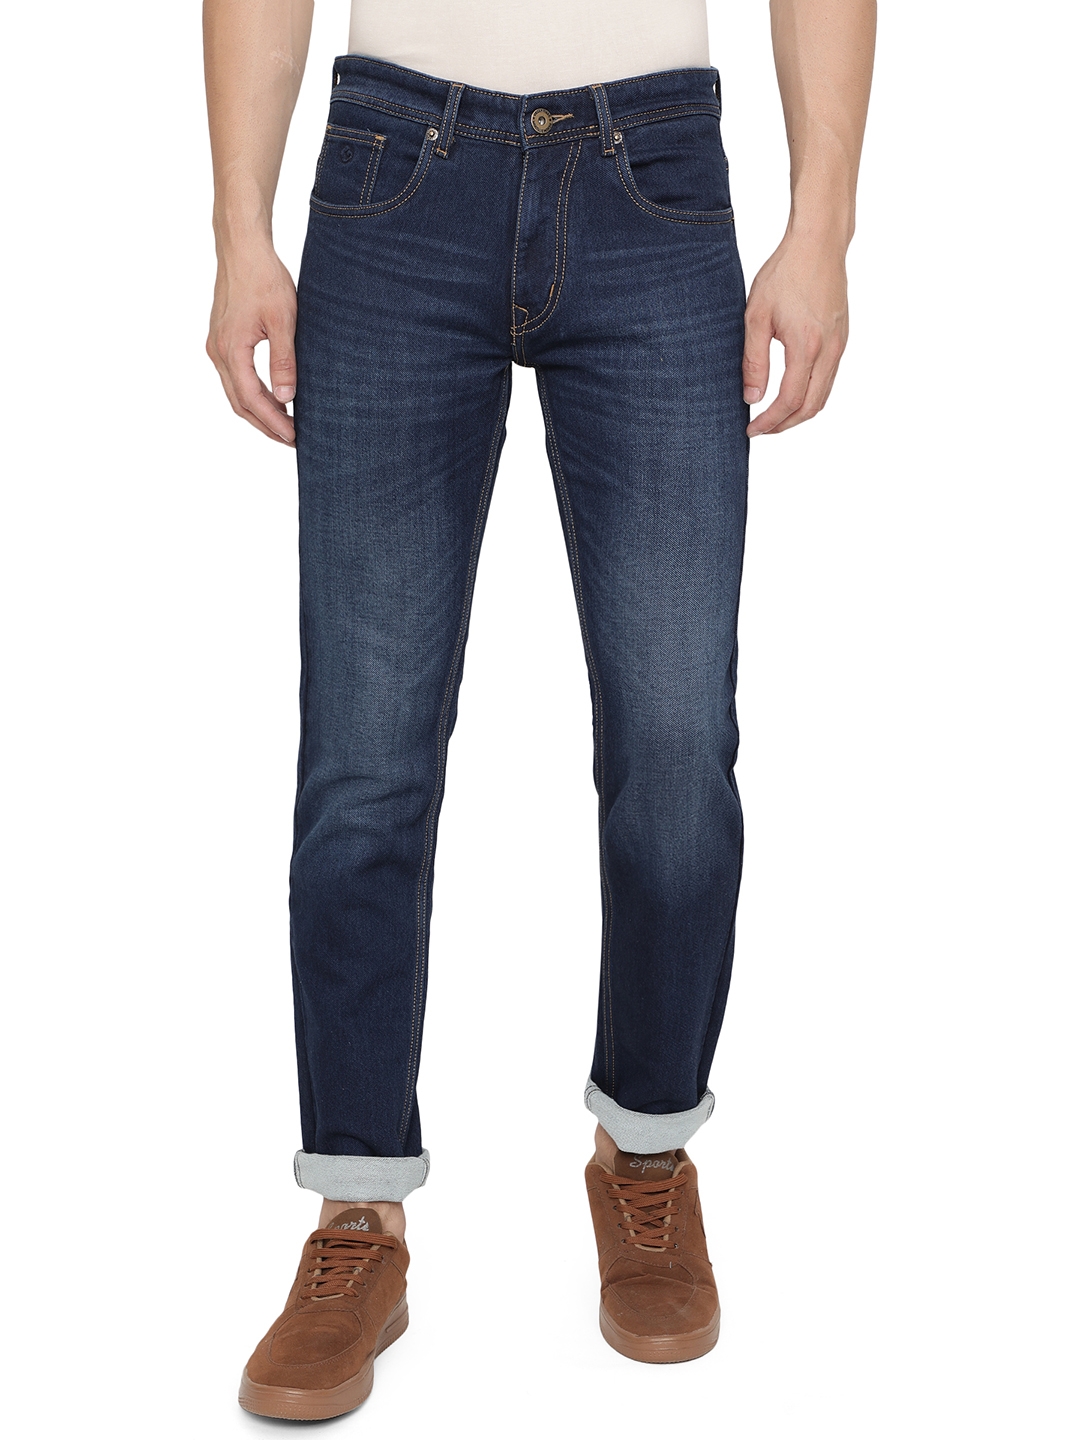 Greenfibre | Midnight Blue Washed Narrow Fit Jeans | Greenfibre